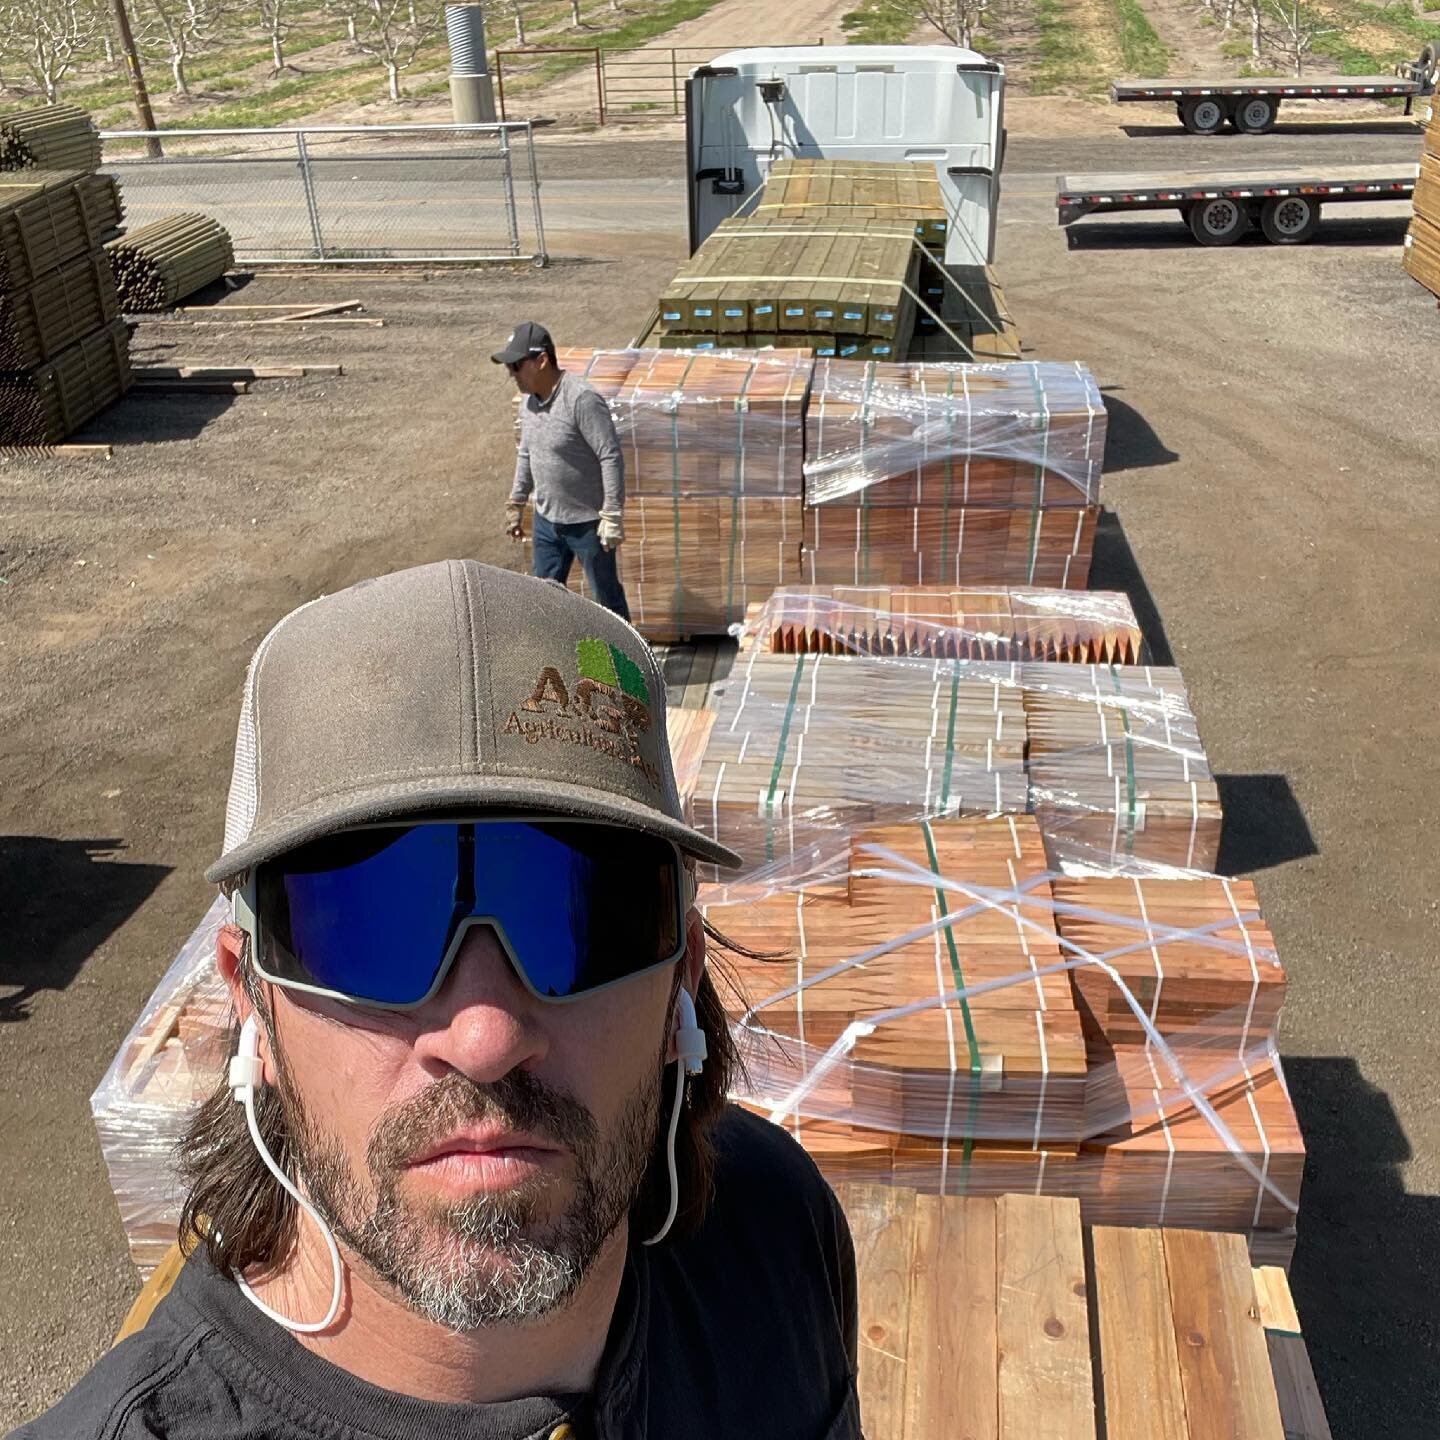 Friday&rsquo;s are moving days! Let&rsquo;s load this semi and get it on the road! Headed down to the OC. #shipping #caag #itsfriday #aandgagsupply #stakes #landscapeties #redwoodstakes #simpleties